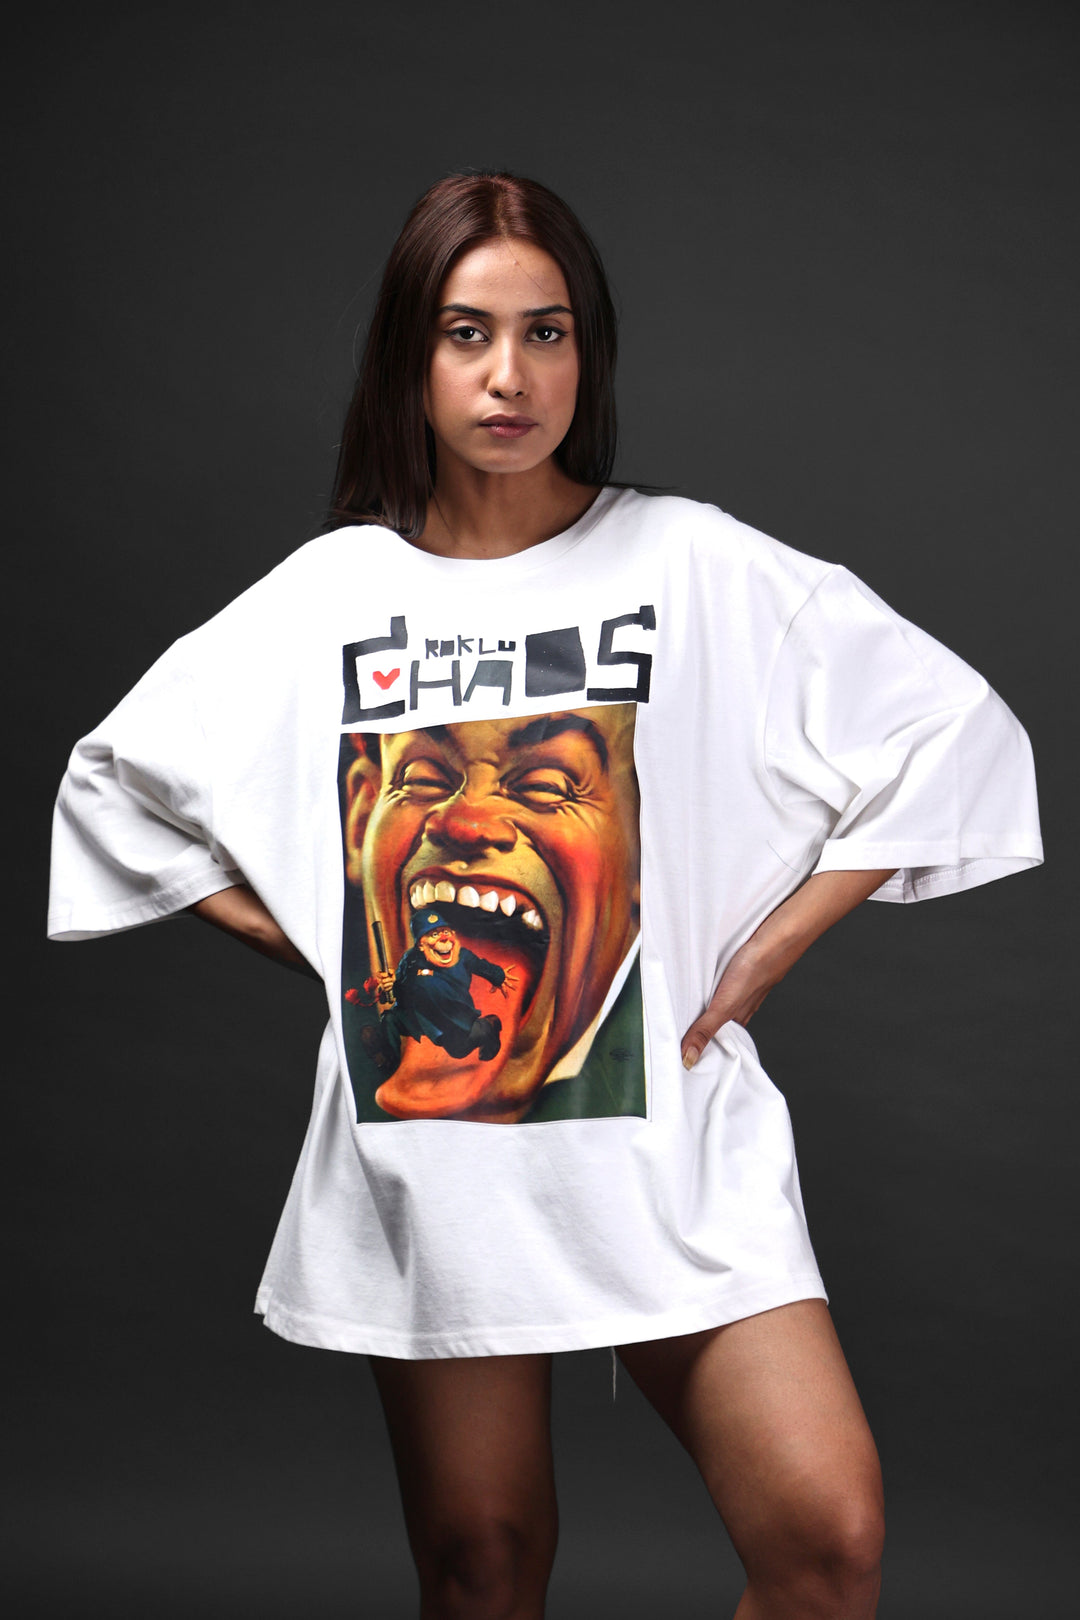 Over Size Tee - Chaos-Women's Over Size Tee#24